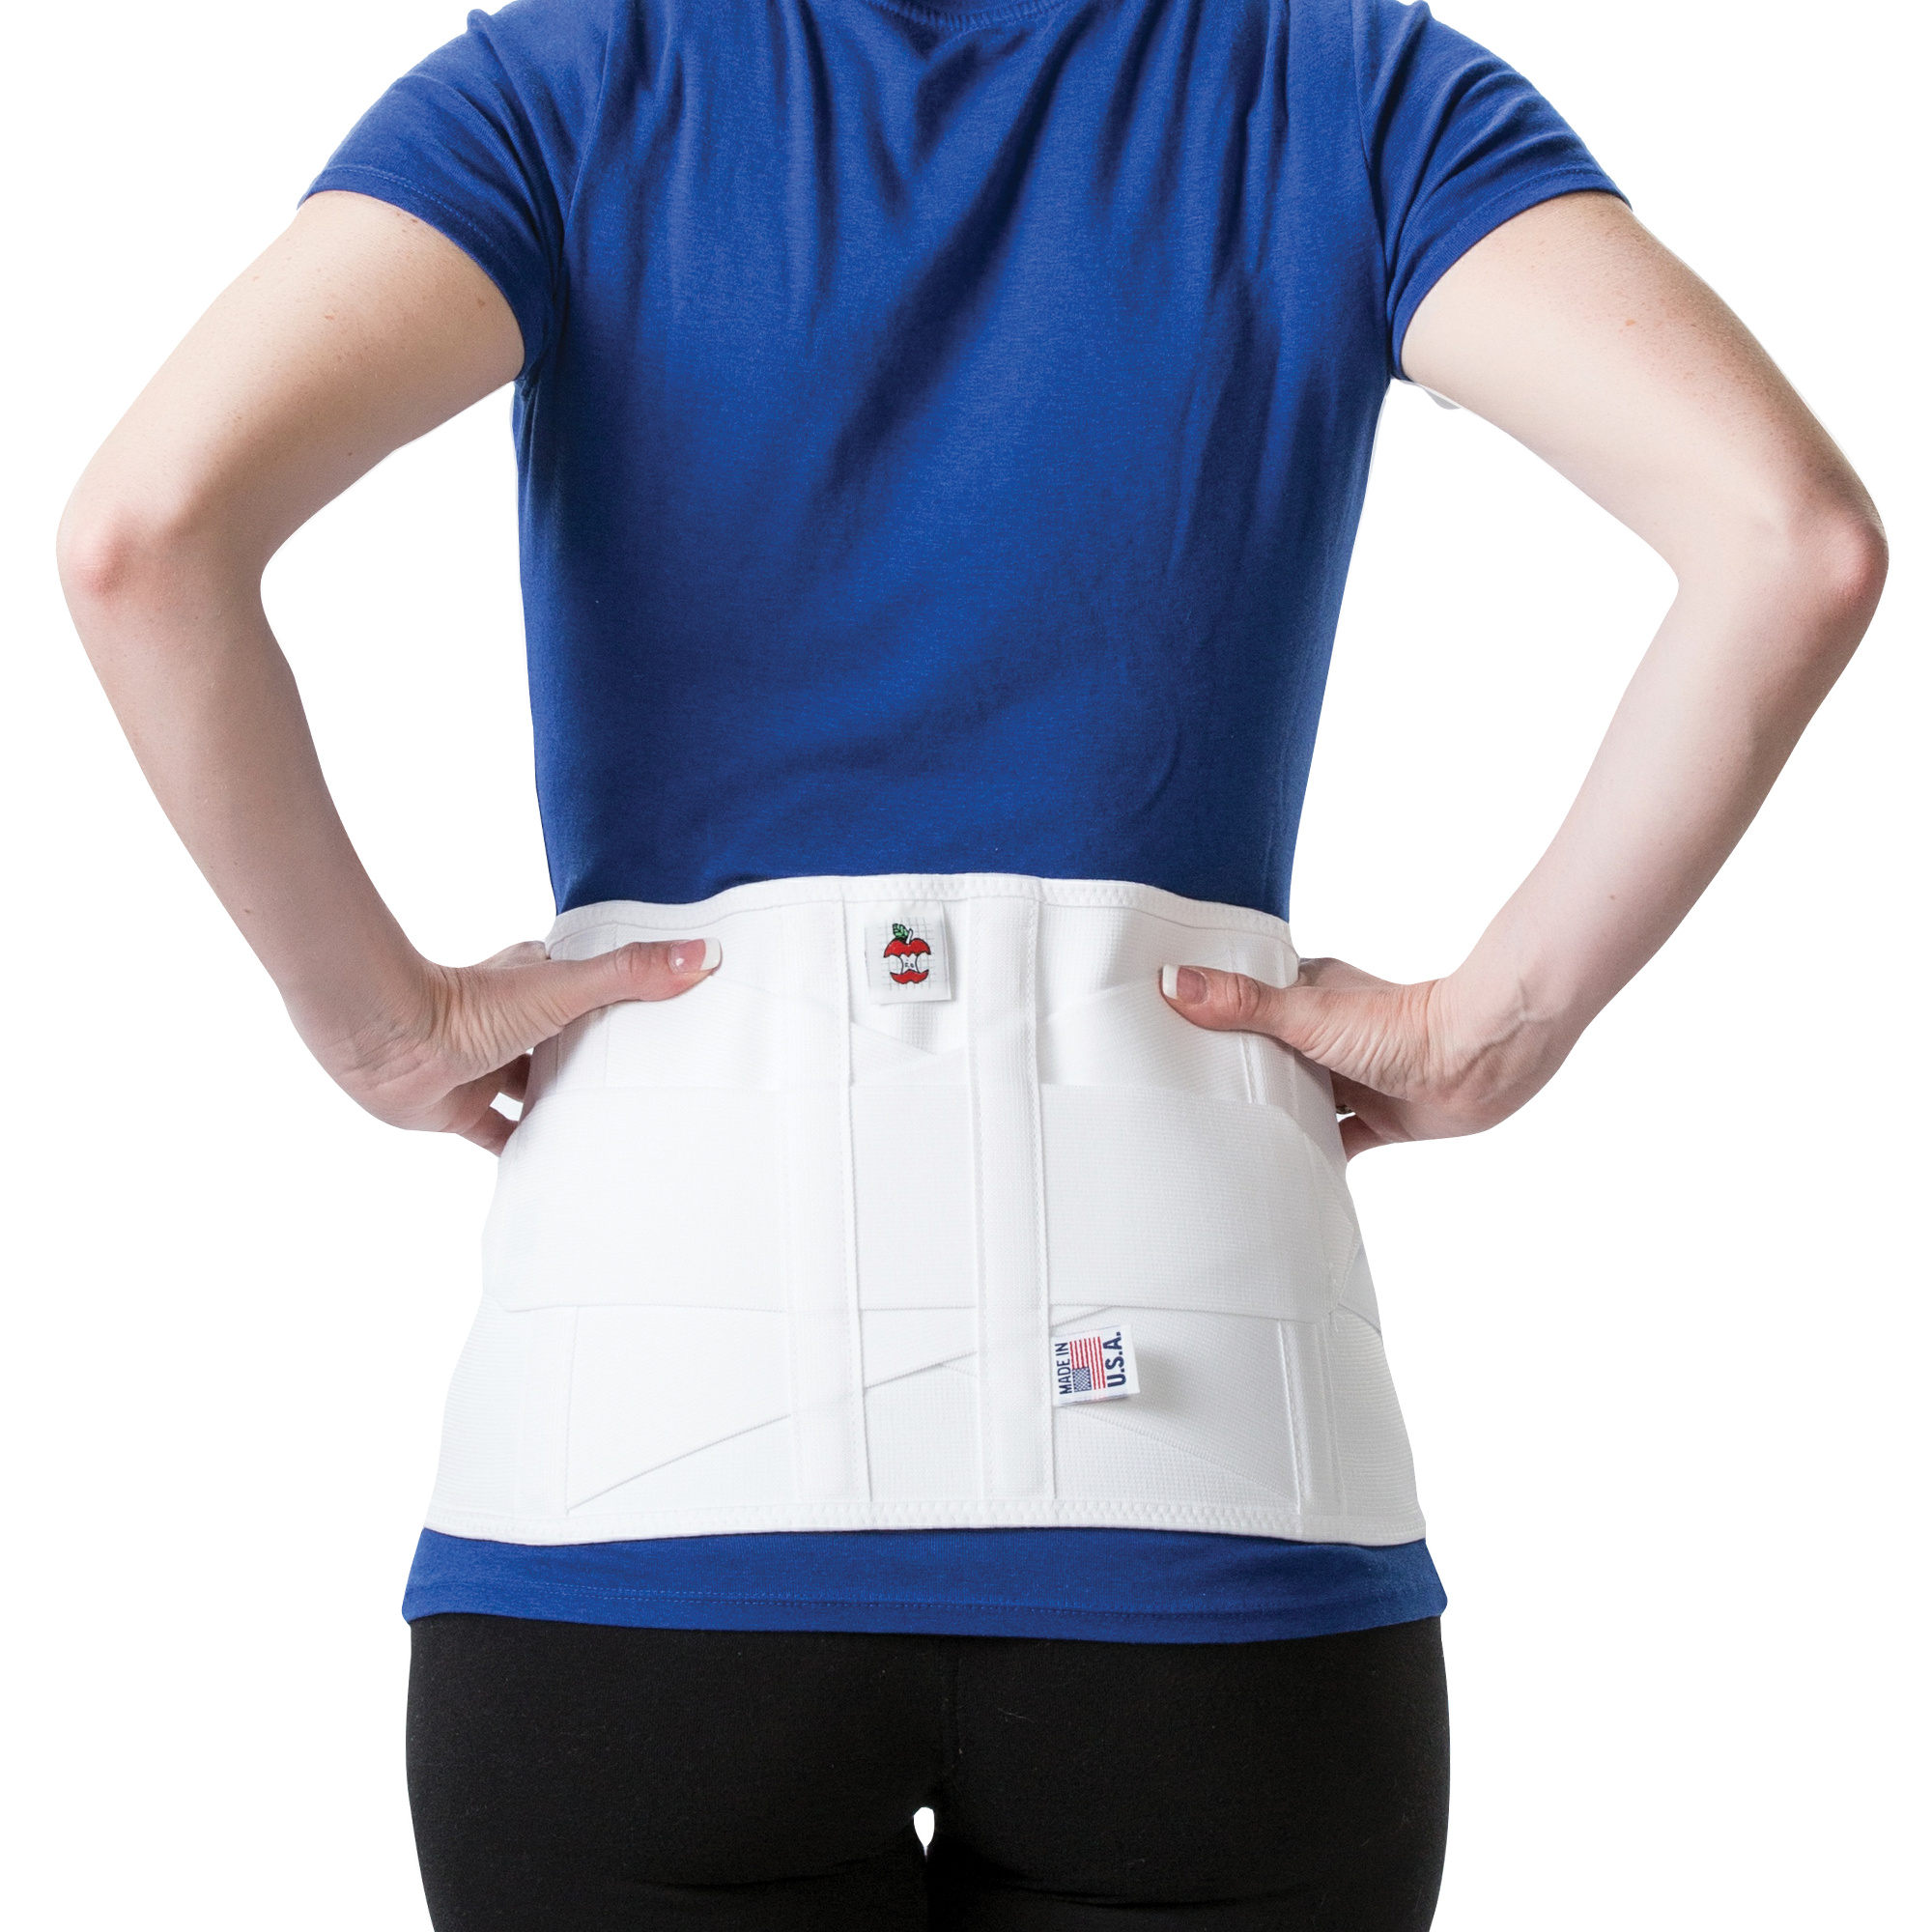 Dual Pull Elastic Crisscross Back Support - physio supplies canada